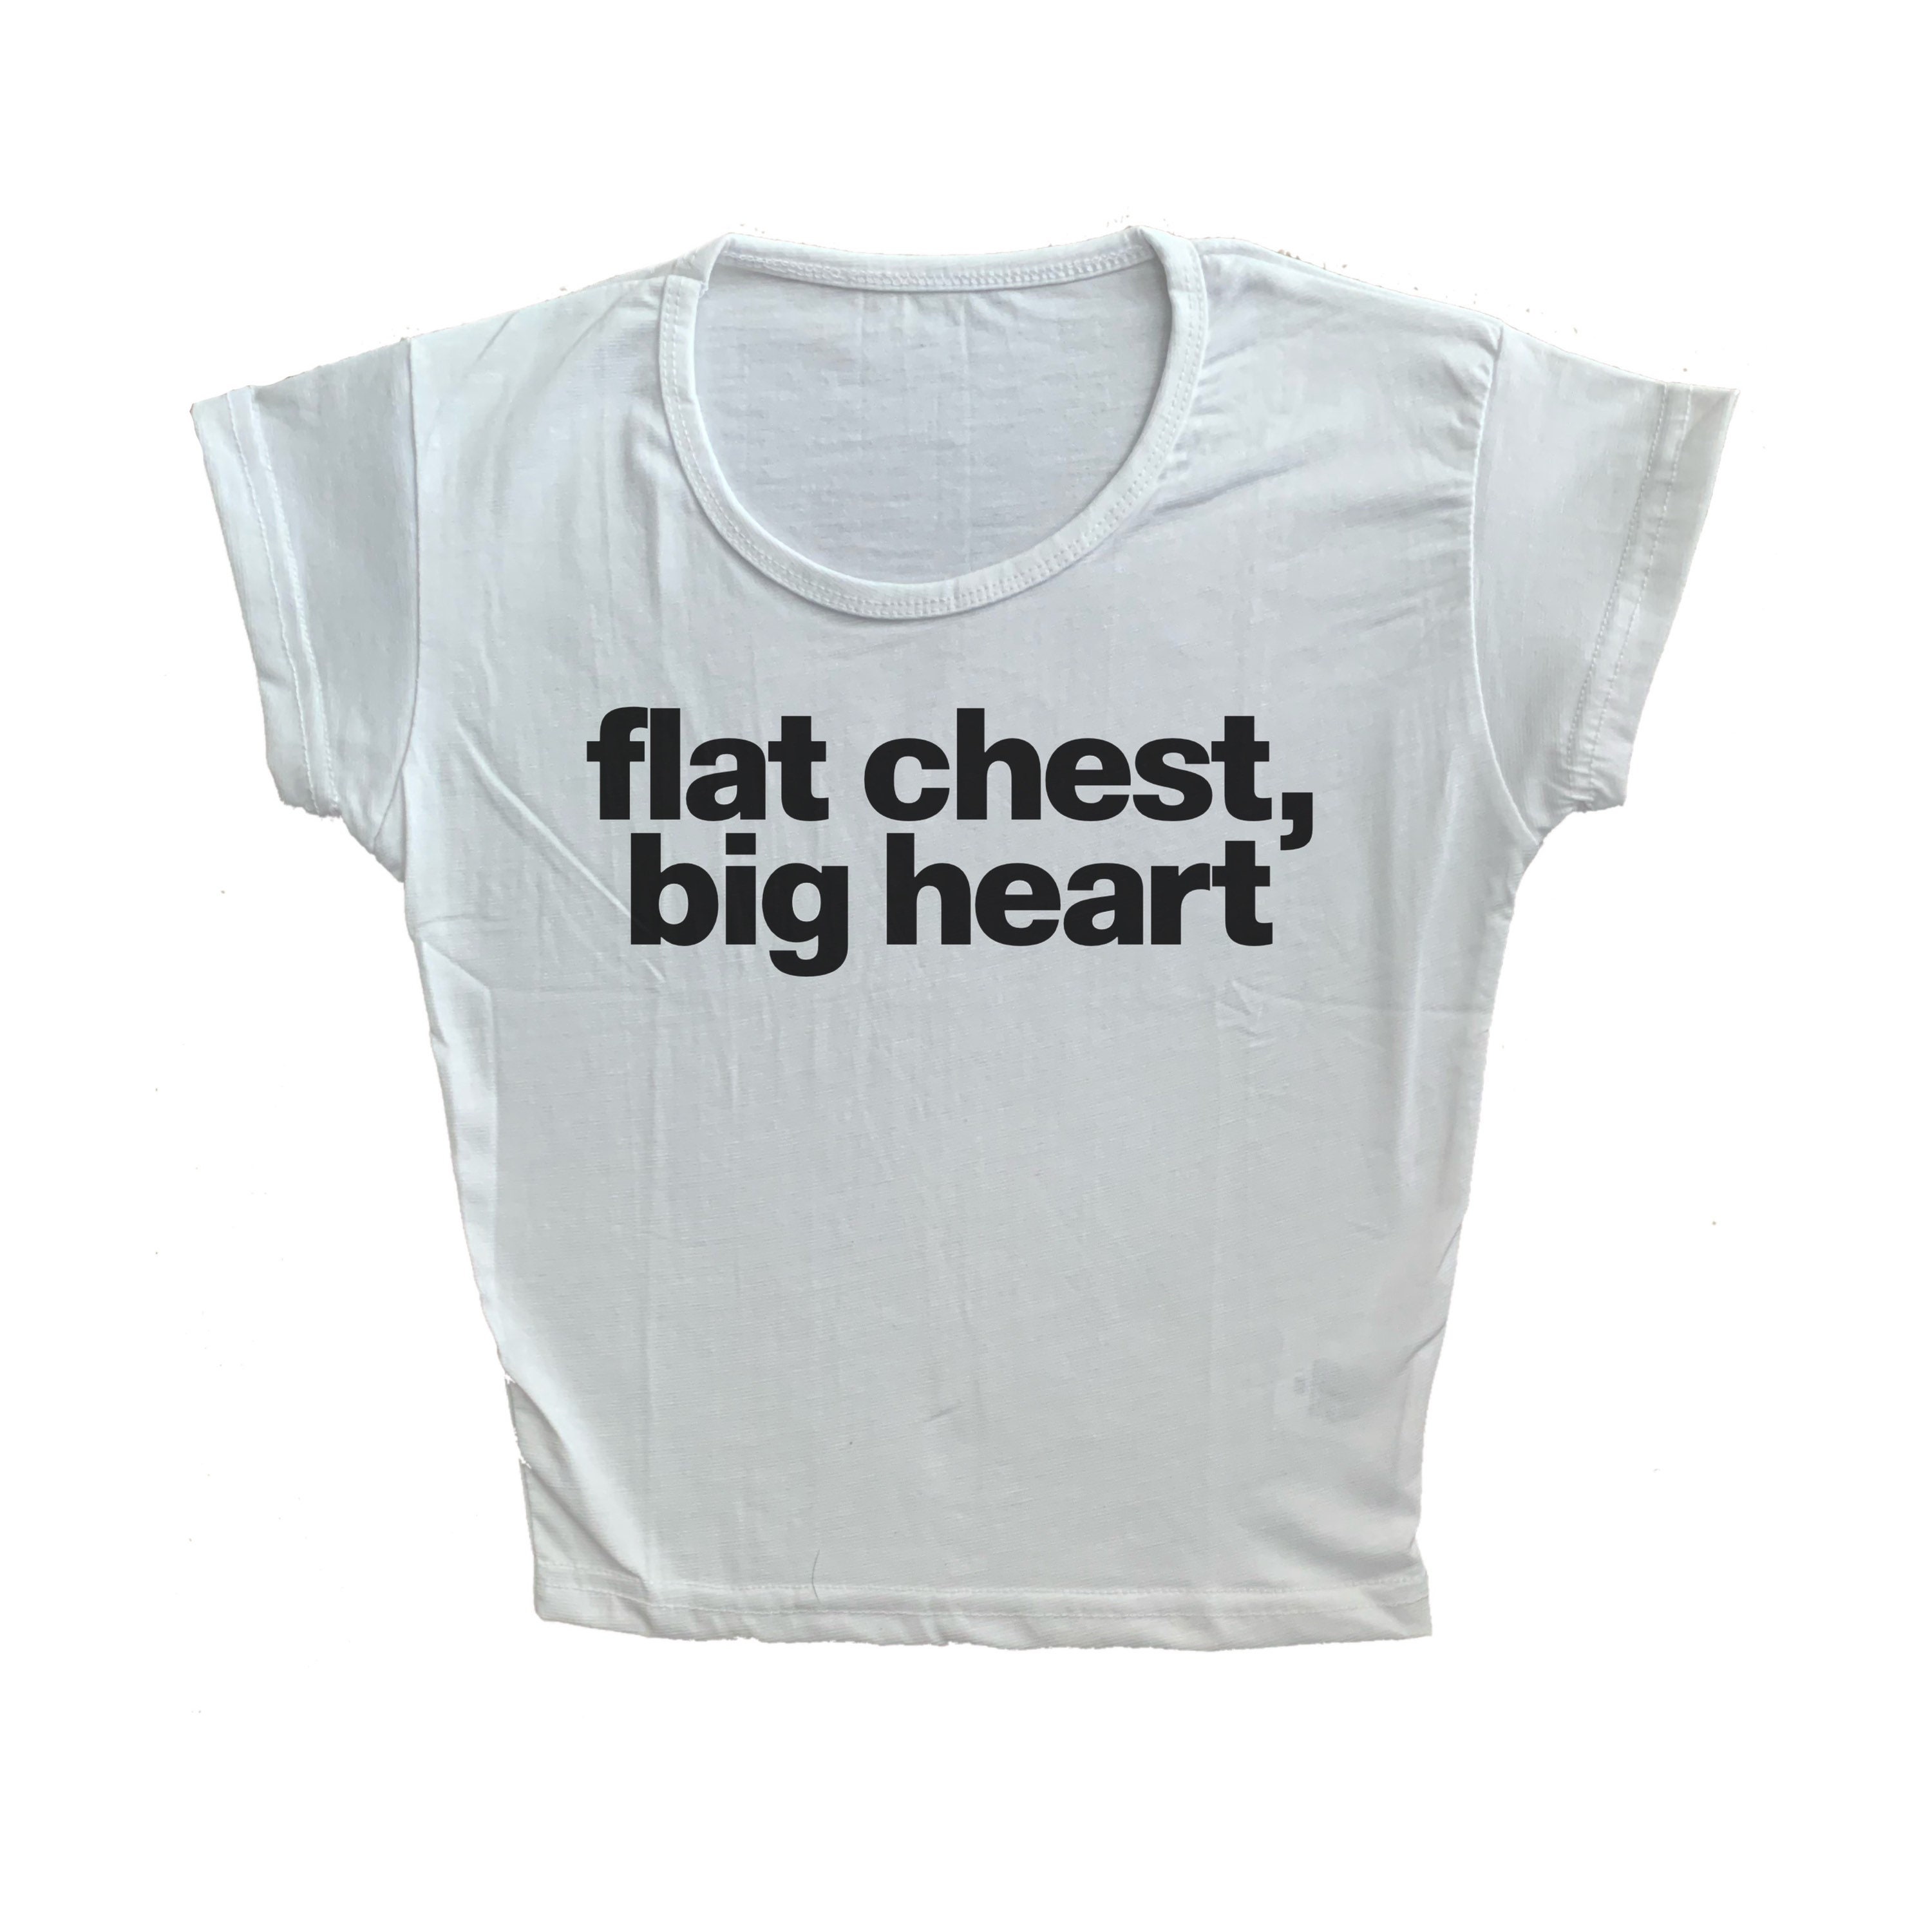 Flat Chest Big Heart Slogan Baby Tee Y2k Cropped Graphic T Shirt 2000s Era  Mall Goth Style Top 